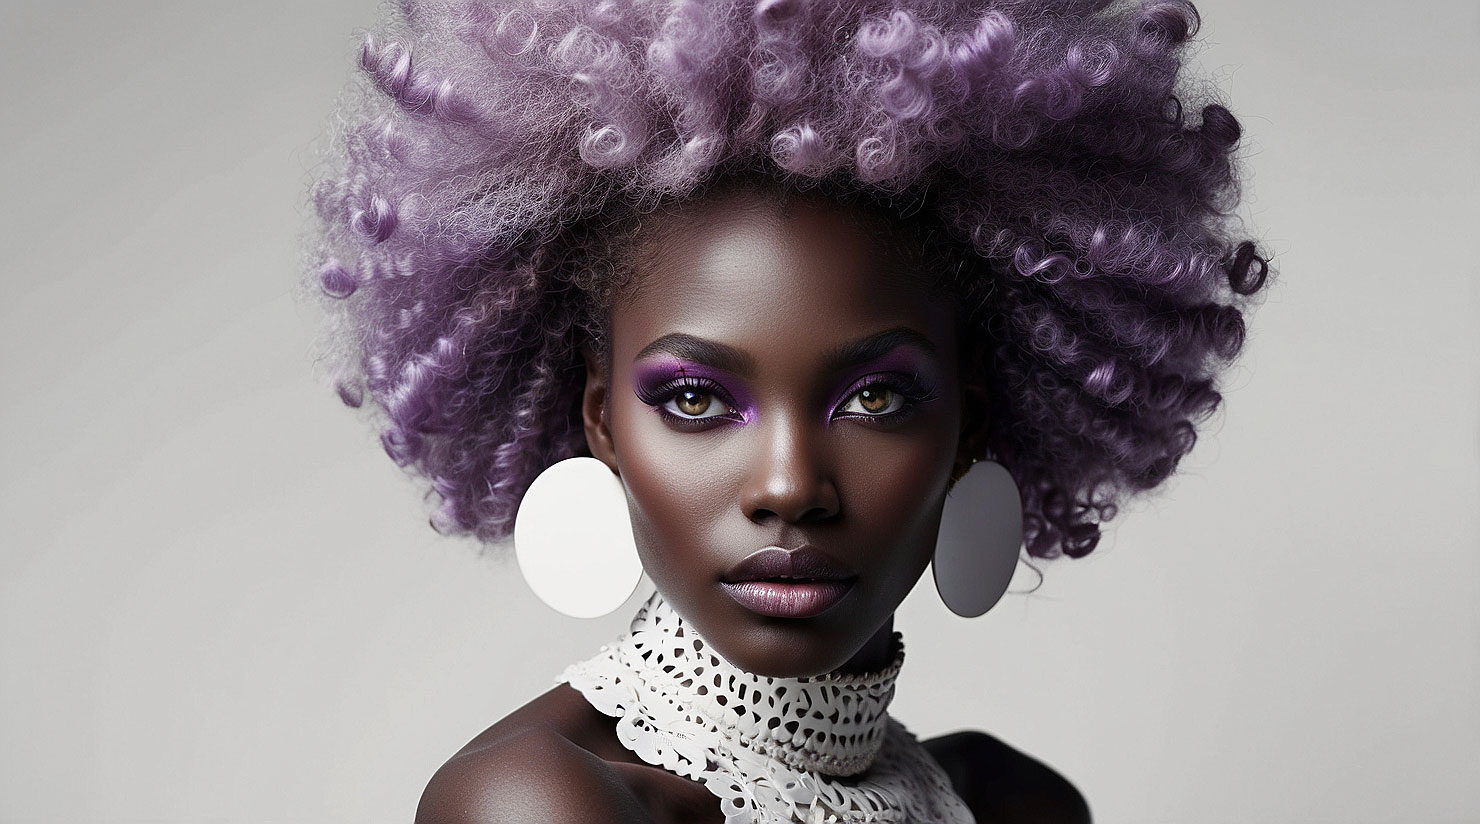 black_skinned_model_with_purpel_eyes_and_afro_hairs_web